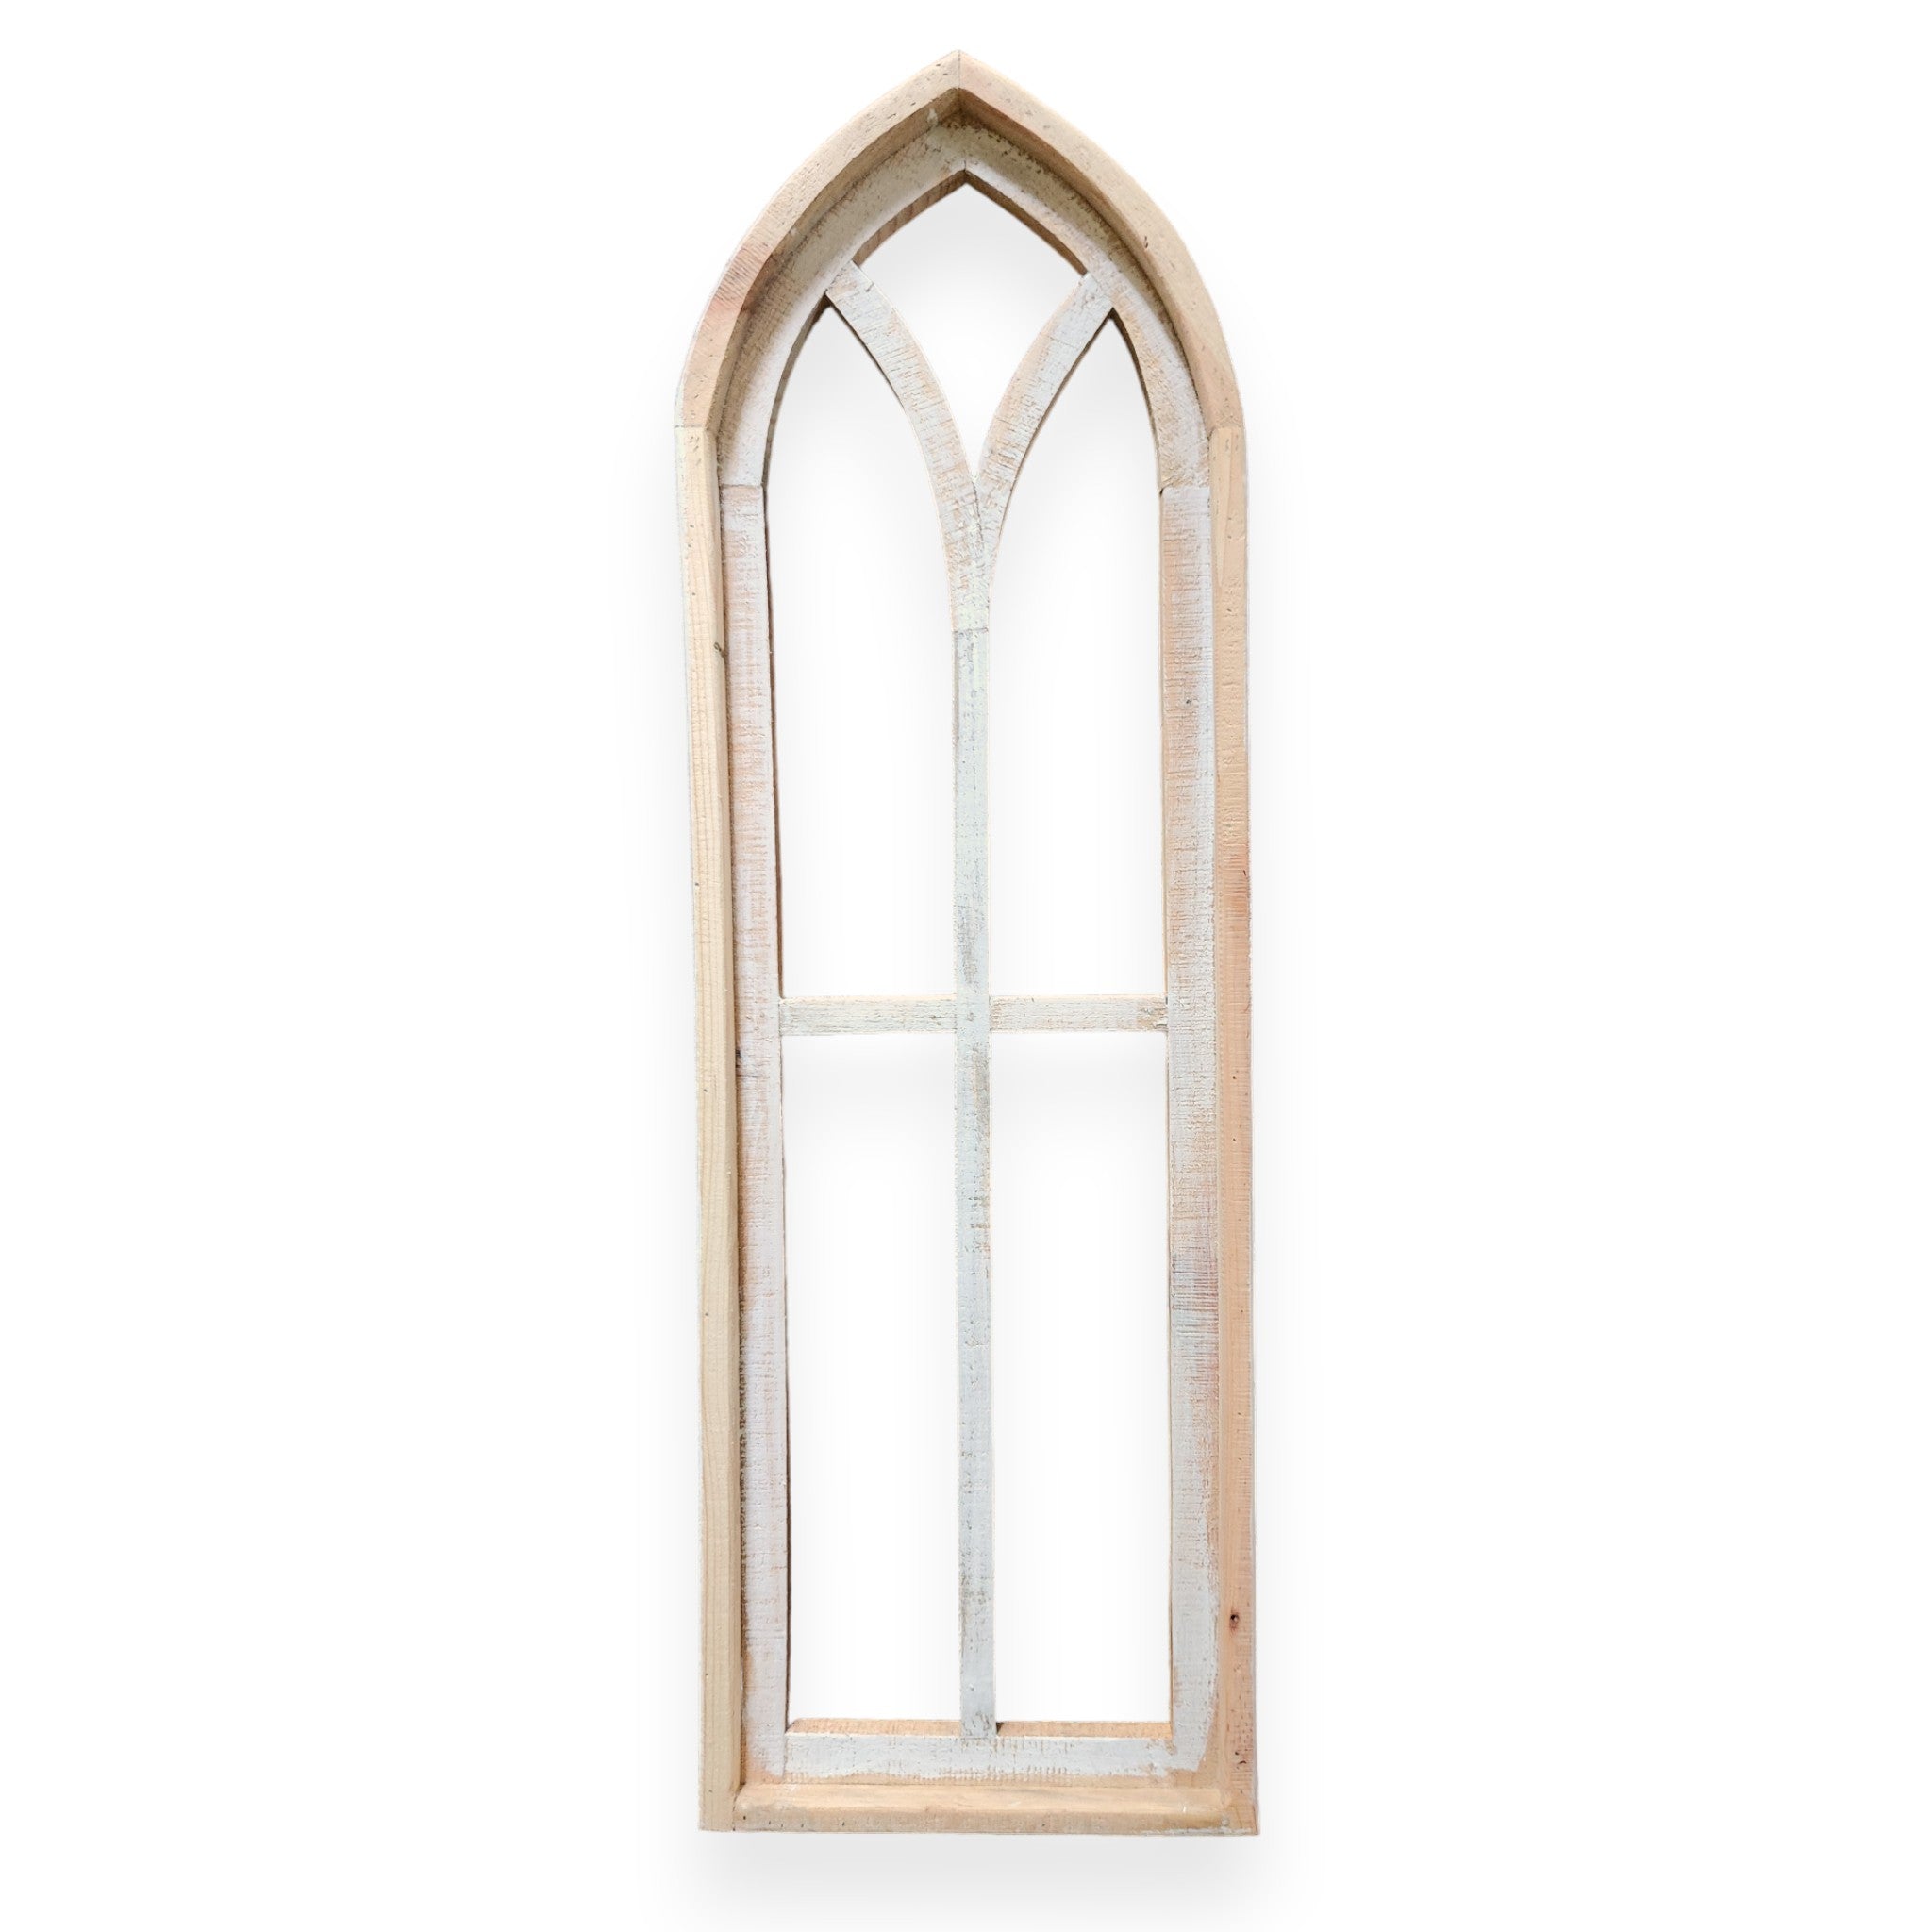 The Ivory Point Farmhouse Wooden Wall Window Arch Single -3 Sizes Cathedral